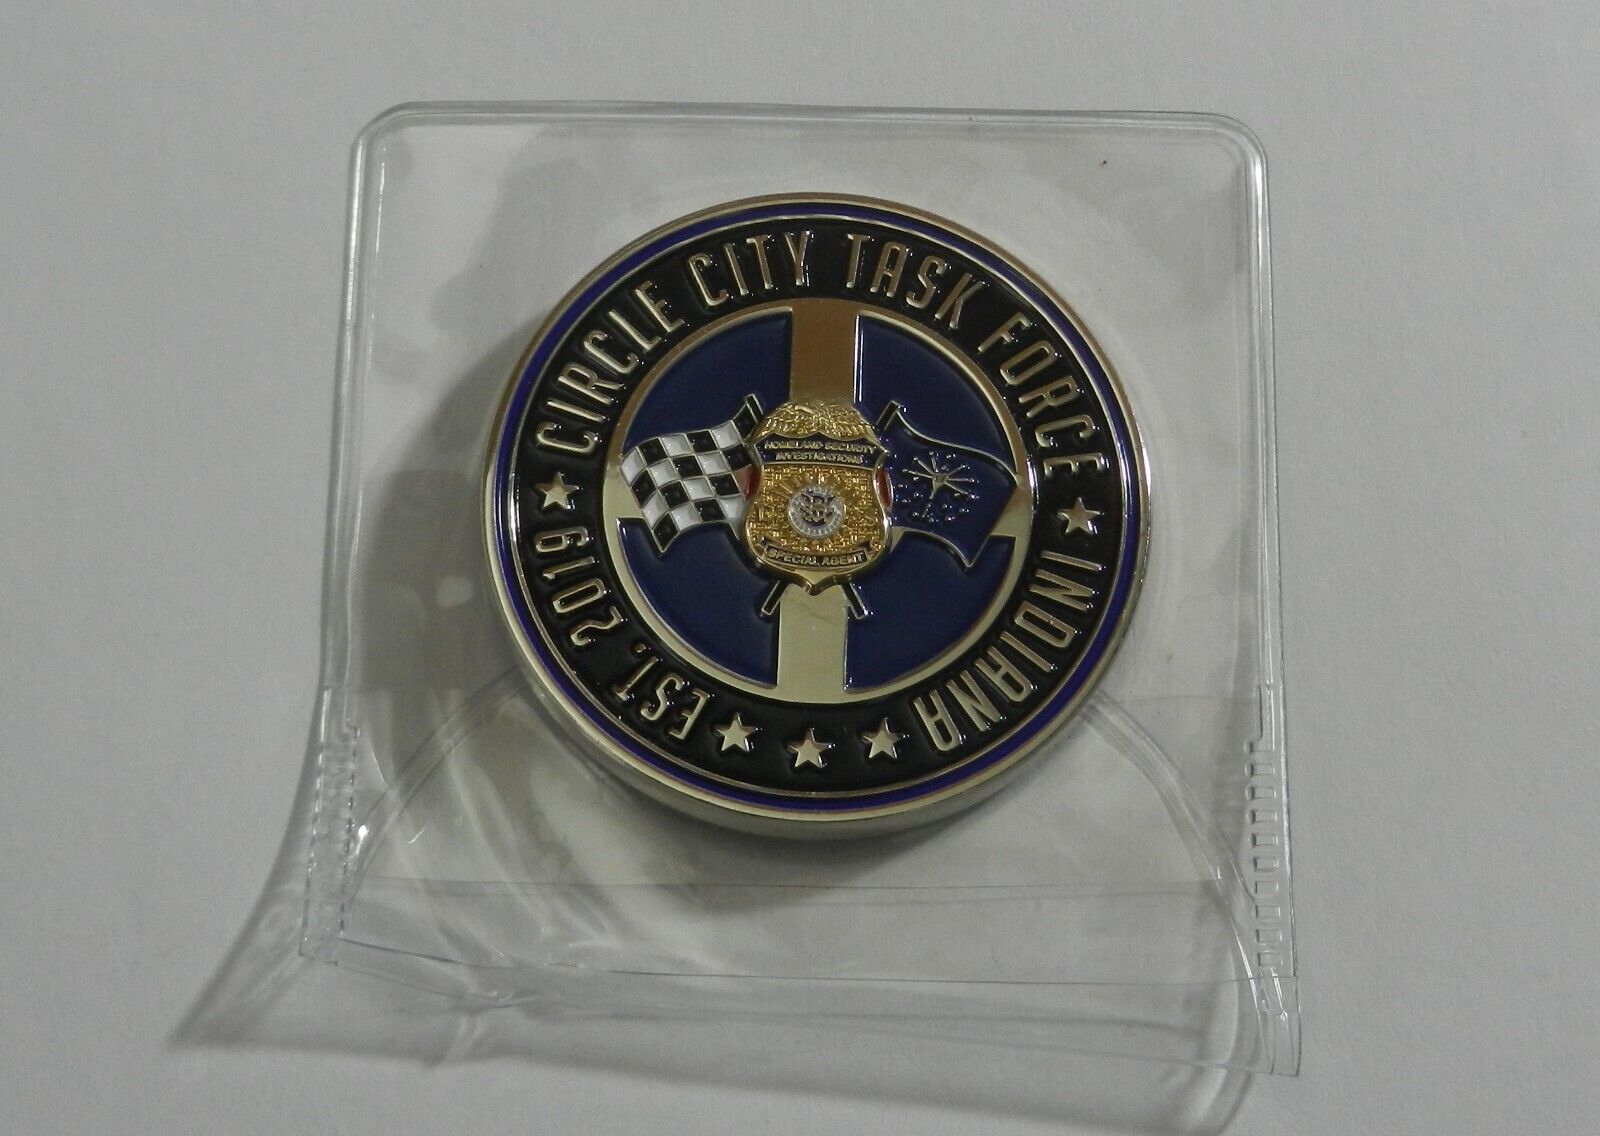 HSI Circle City Task Force Challenge Coin - Very Cool